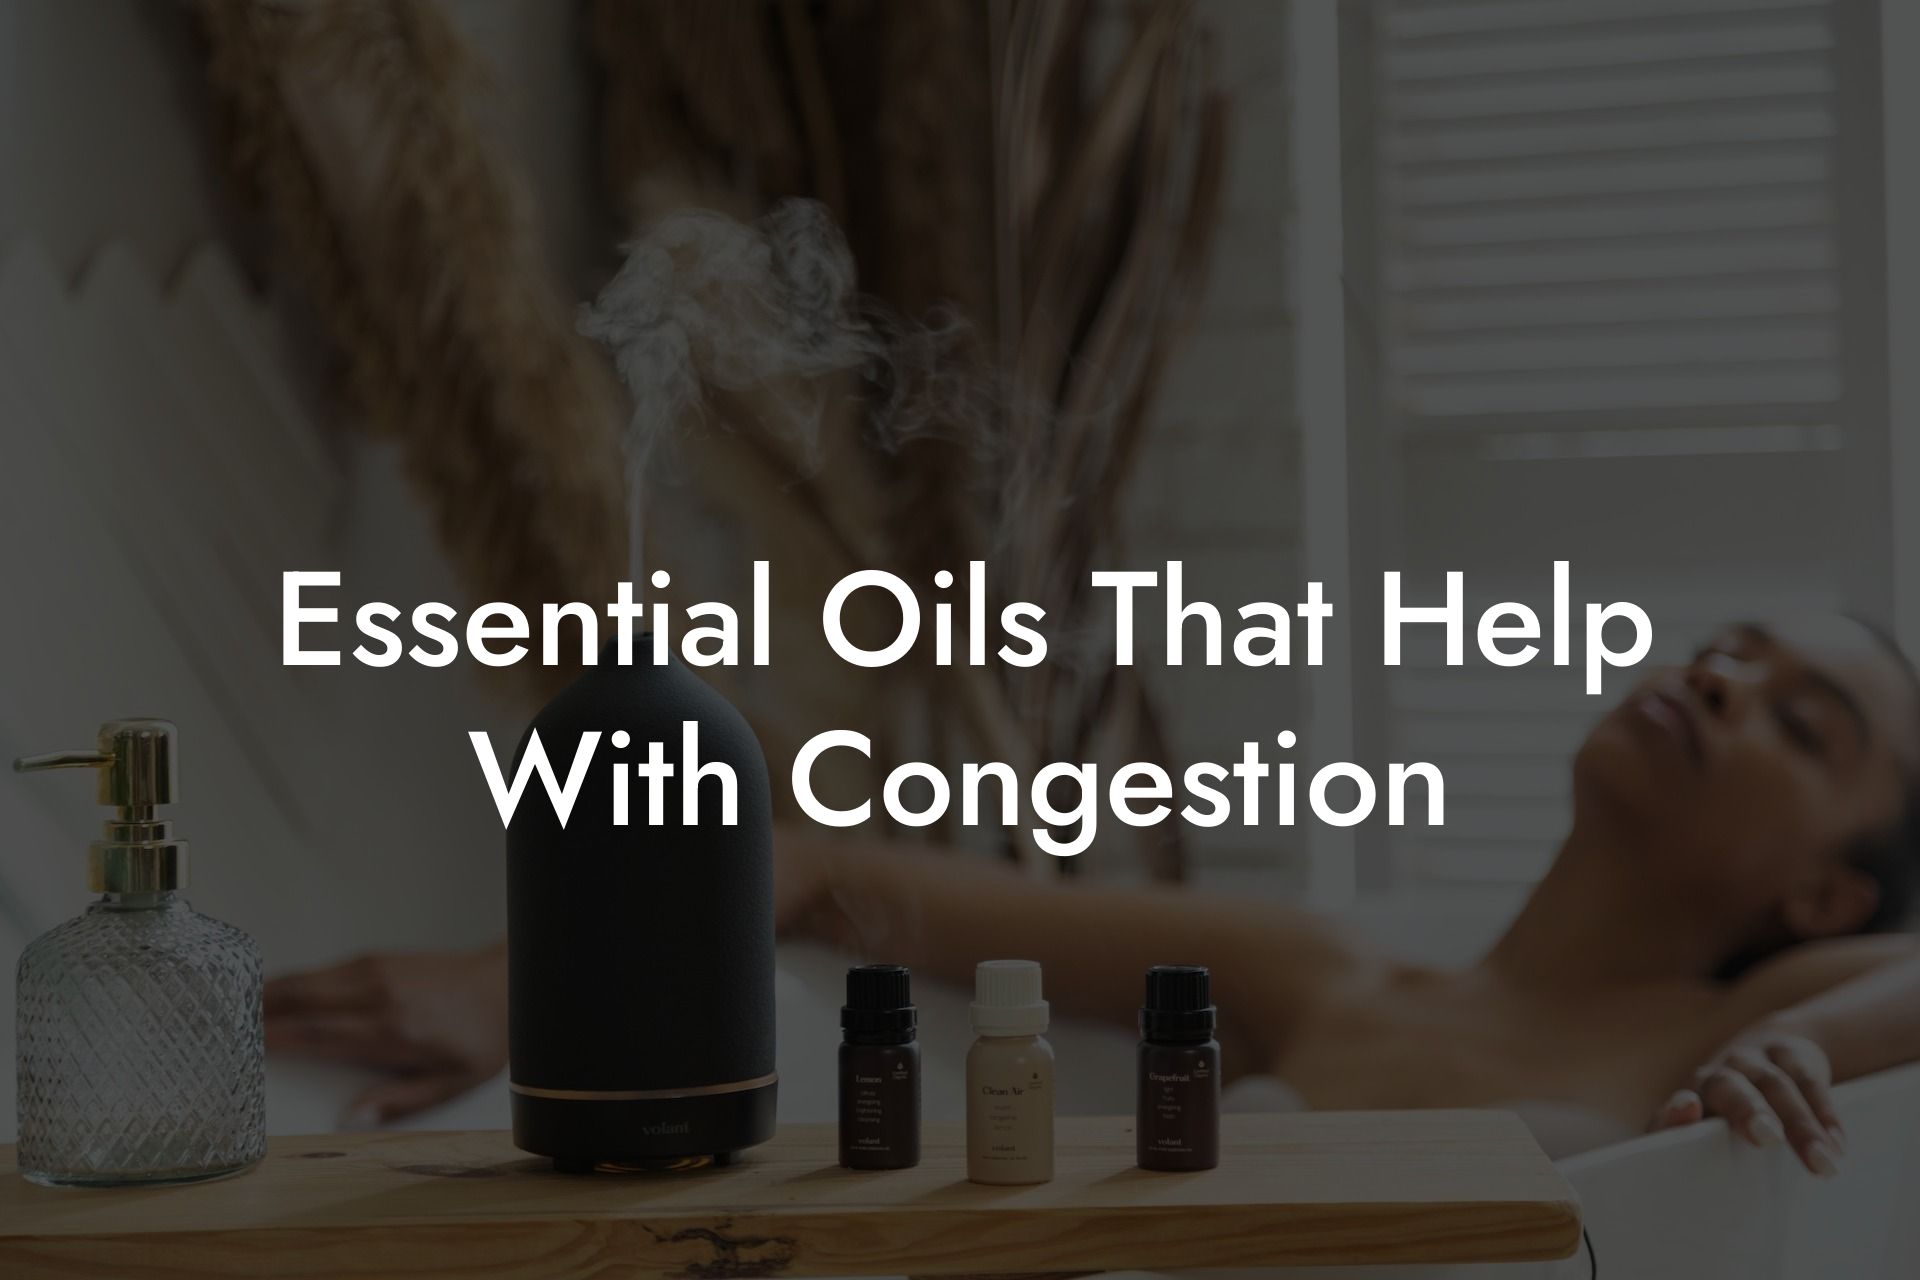 Essential Oils That Help With Congestion